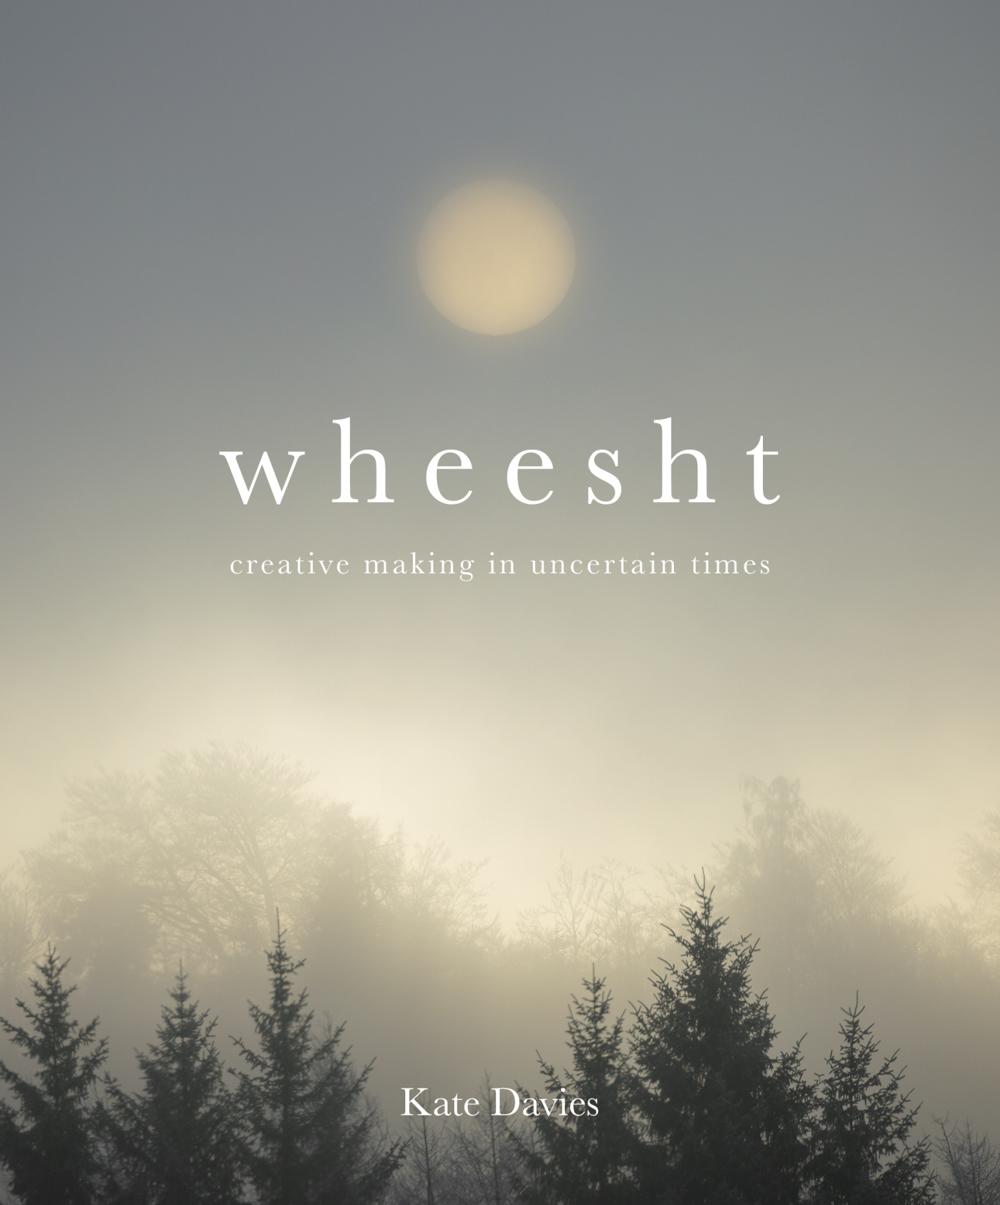 Wheesht - creative making in uncertain times - white title and subtitle against a misty sunrise and pine trees